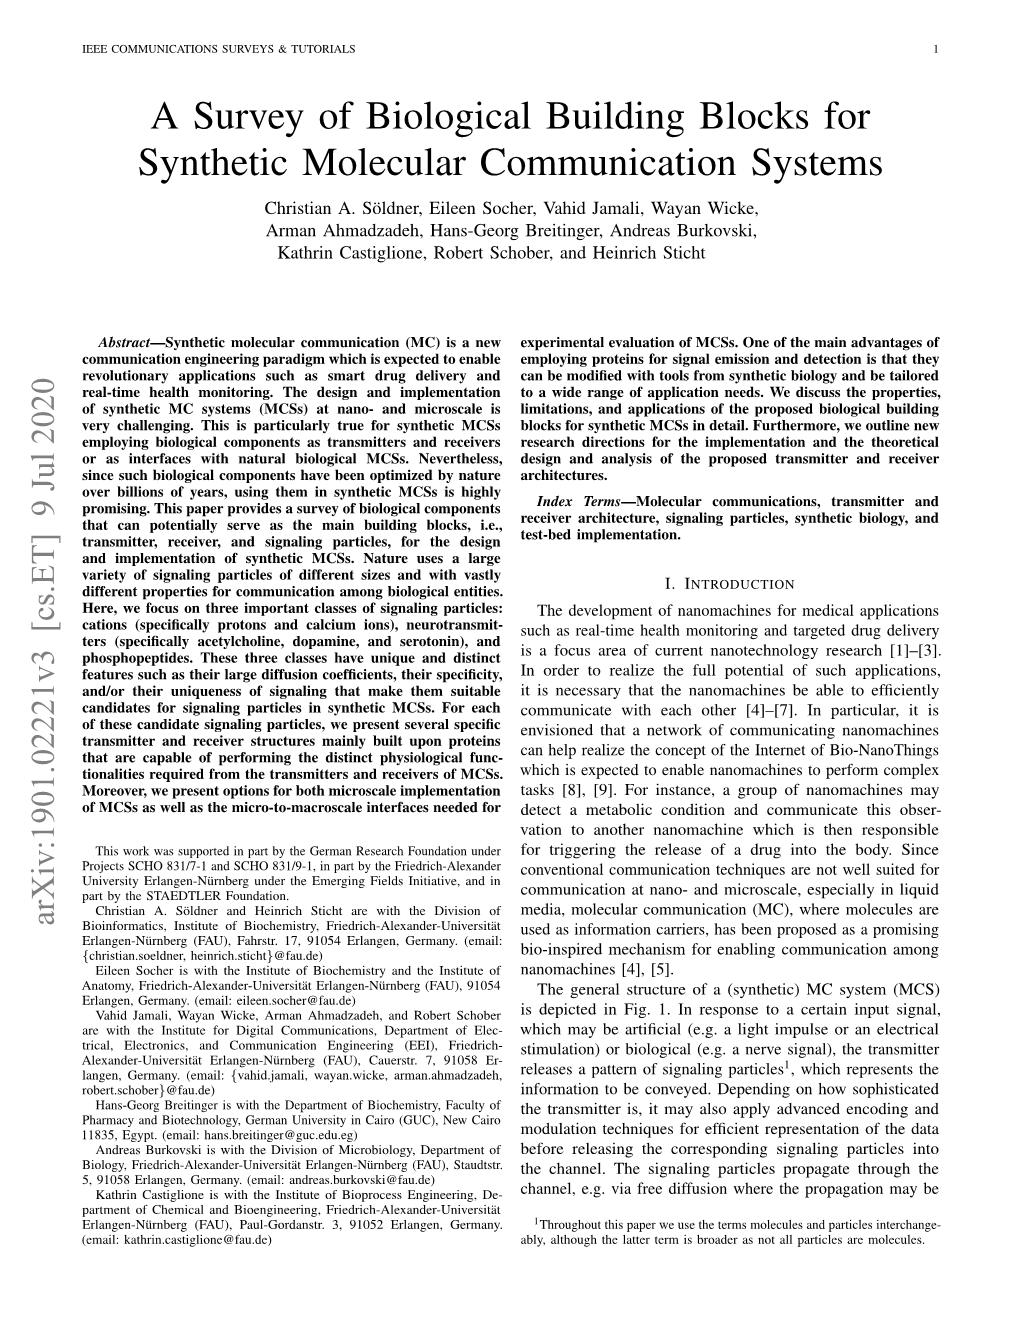 A Survey of Biological Building Blocks for Synthetic Molecular Communication Systems Christian A